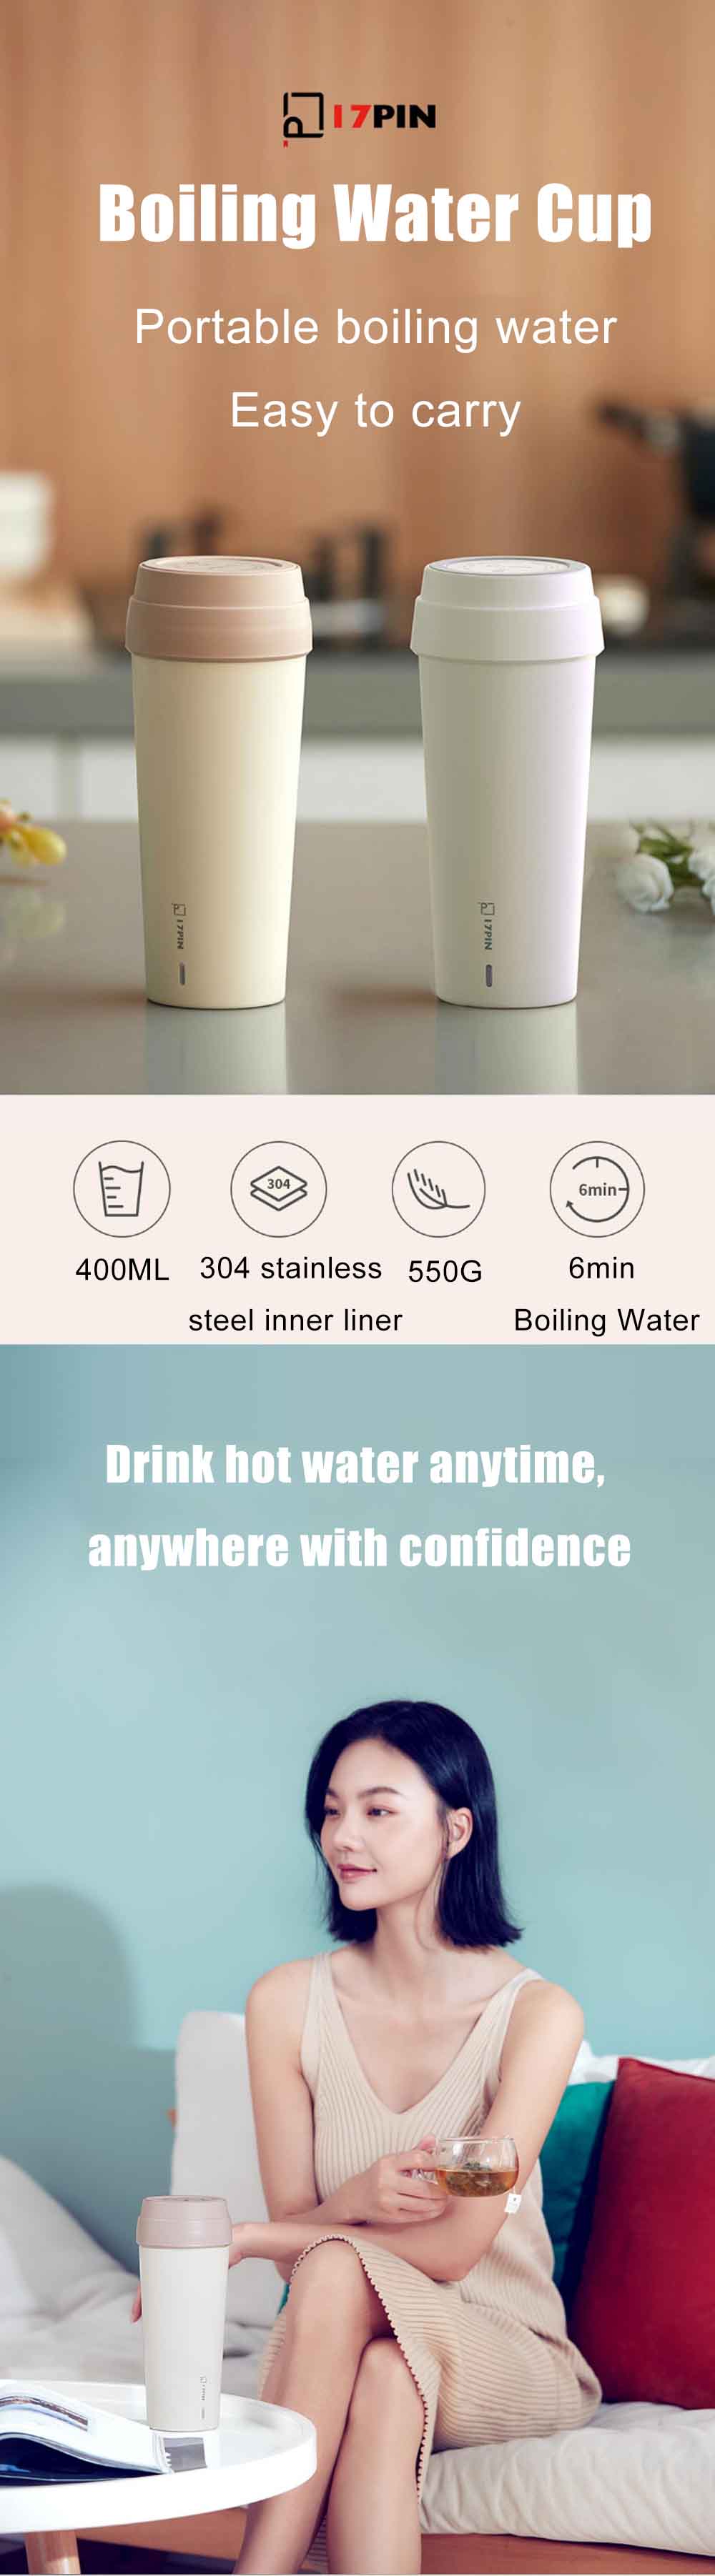 17PIN-400ML-Portable-Mini-Boiling-Water-Cup-Stainless-Steel-Insulation-Cup-Leak-proof-Outdoor-Indoor-1895011-1